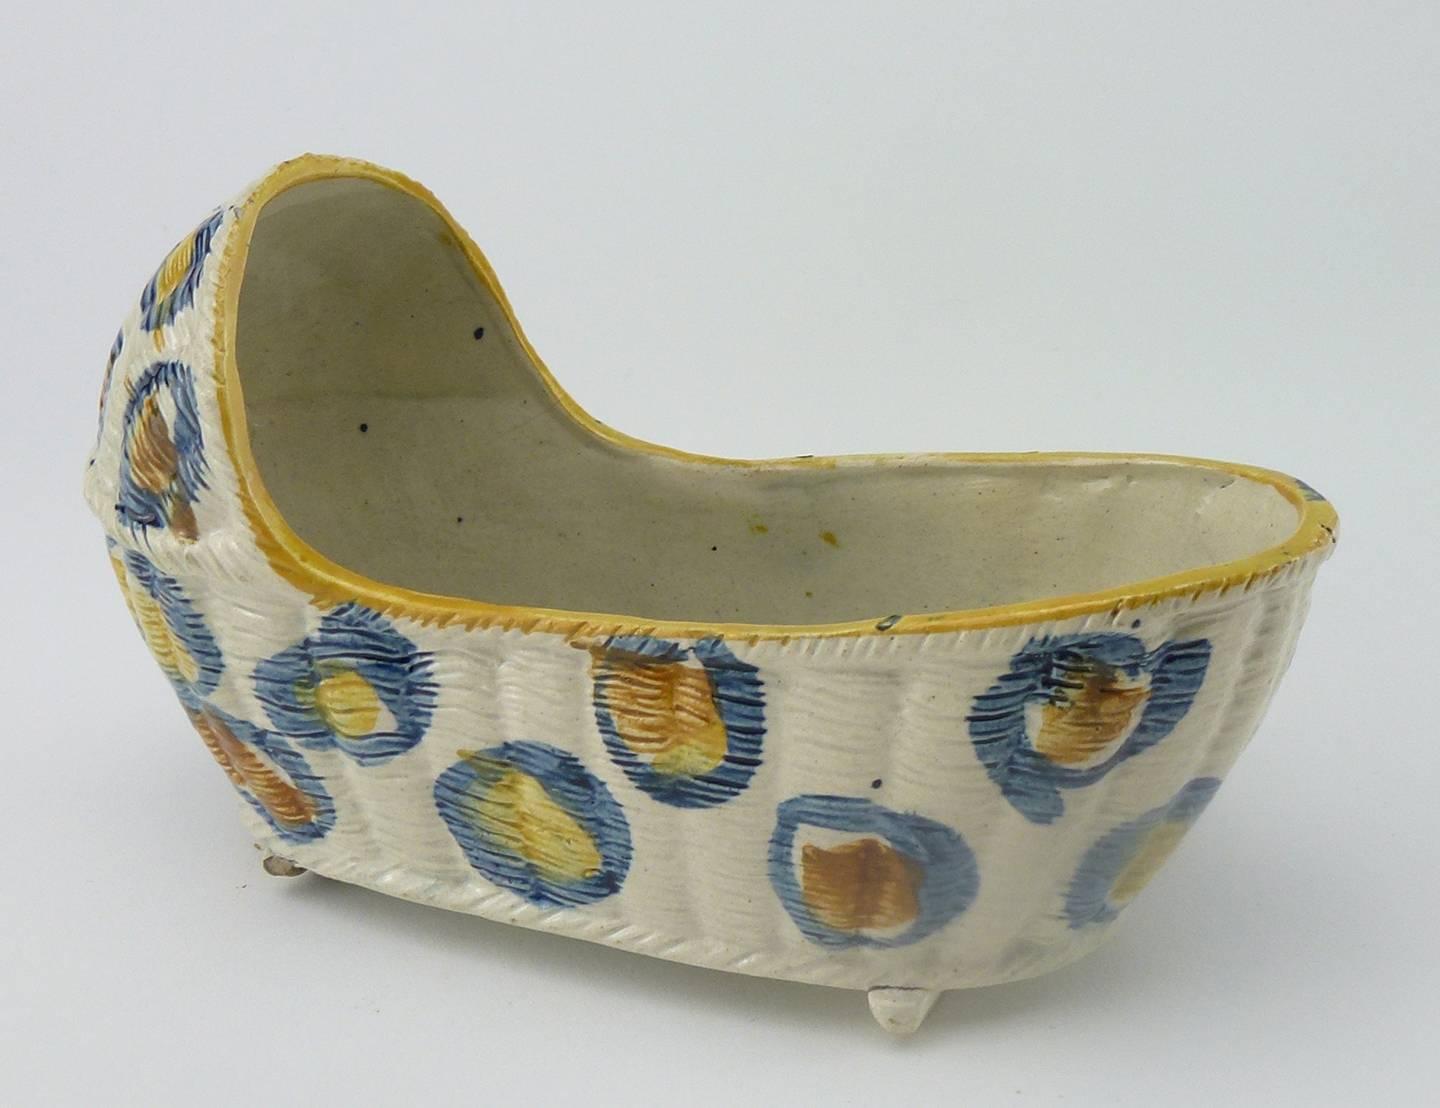 English Staffordshire Pearlware Prattware model of a cradle or moses basket

the ovate body with upper section, modelled to resemble woven rushes with vertical staves, with a rope-twist edge and border between upper and lower head area. Cradle